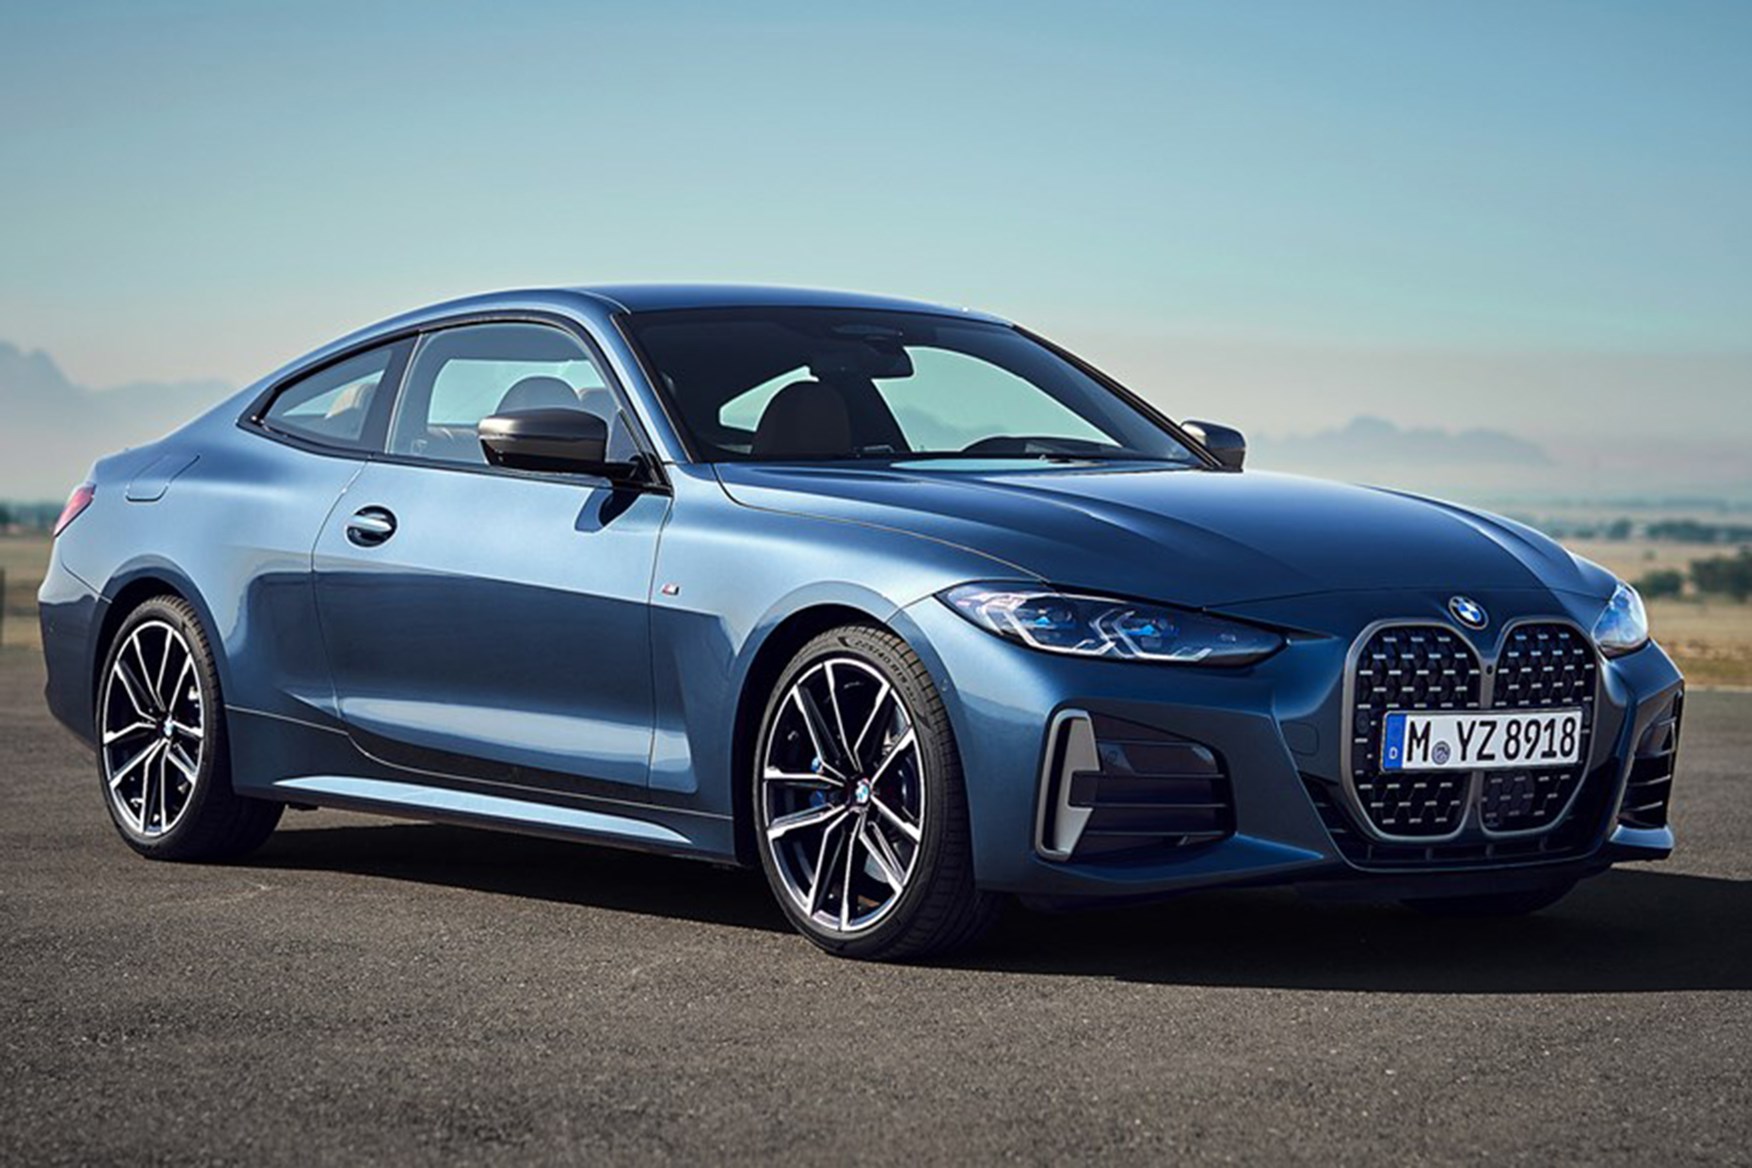 New BMW 4 Series shows its face Parkers